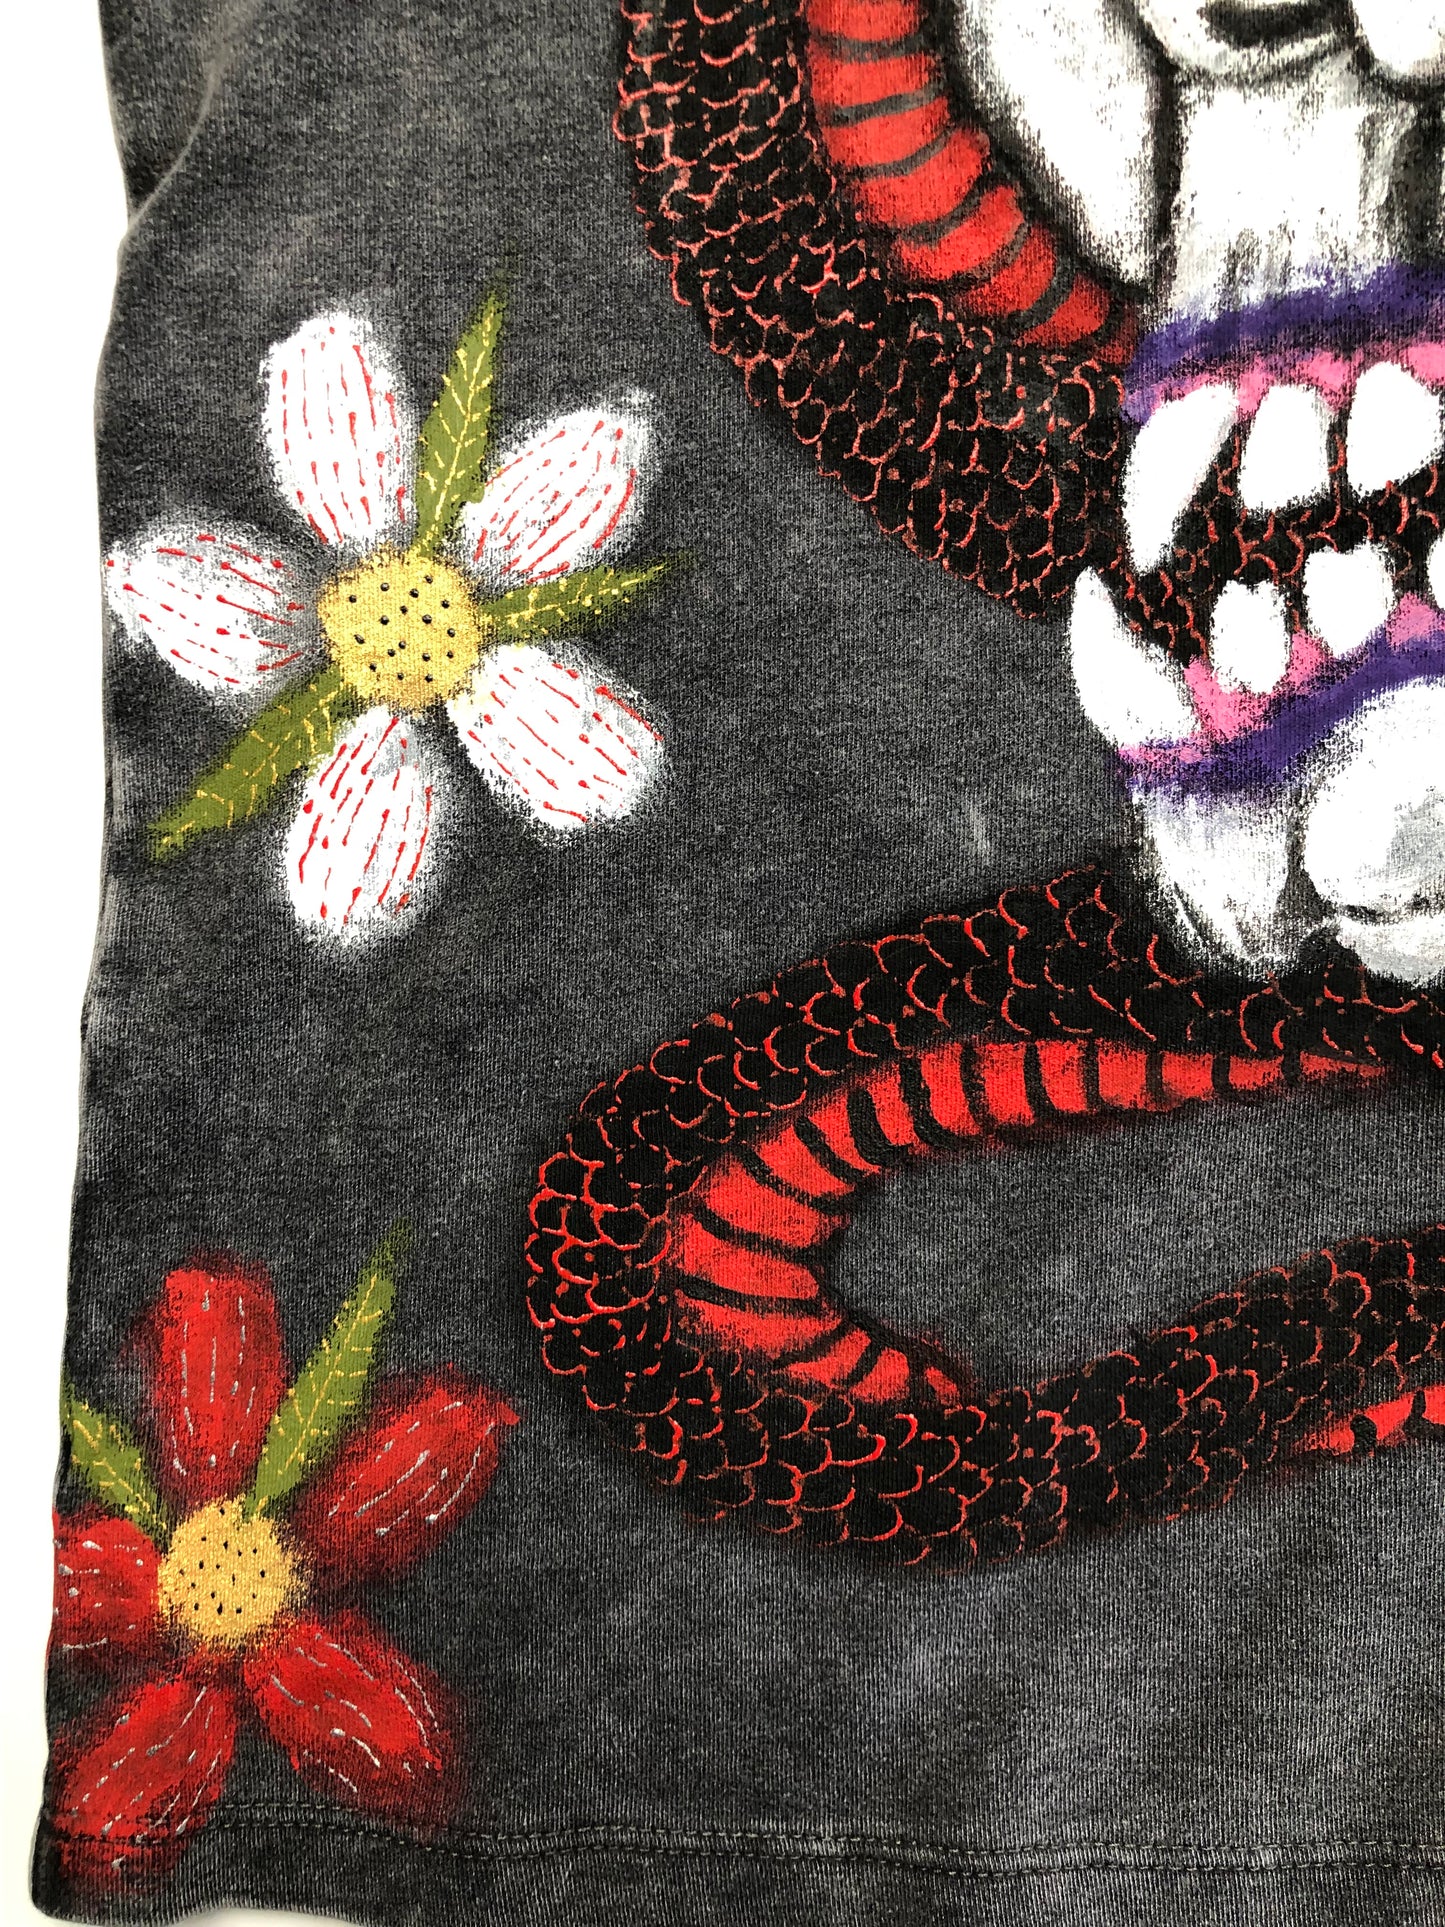 Flower design details on a T -shirt with a snake and a demon